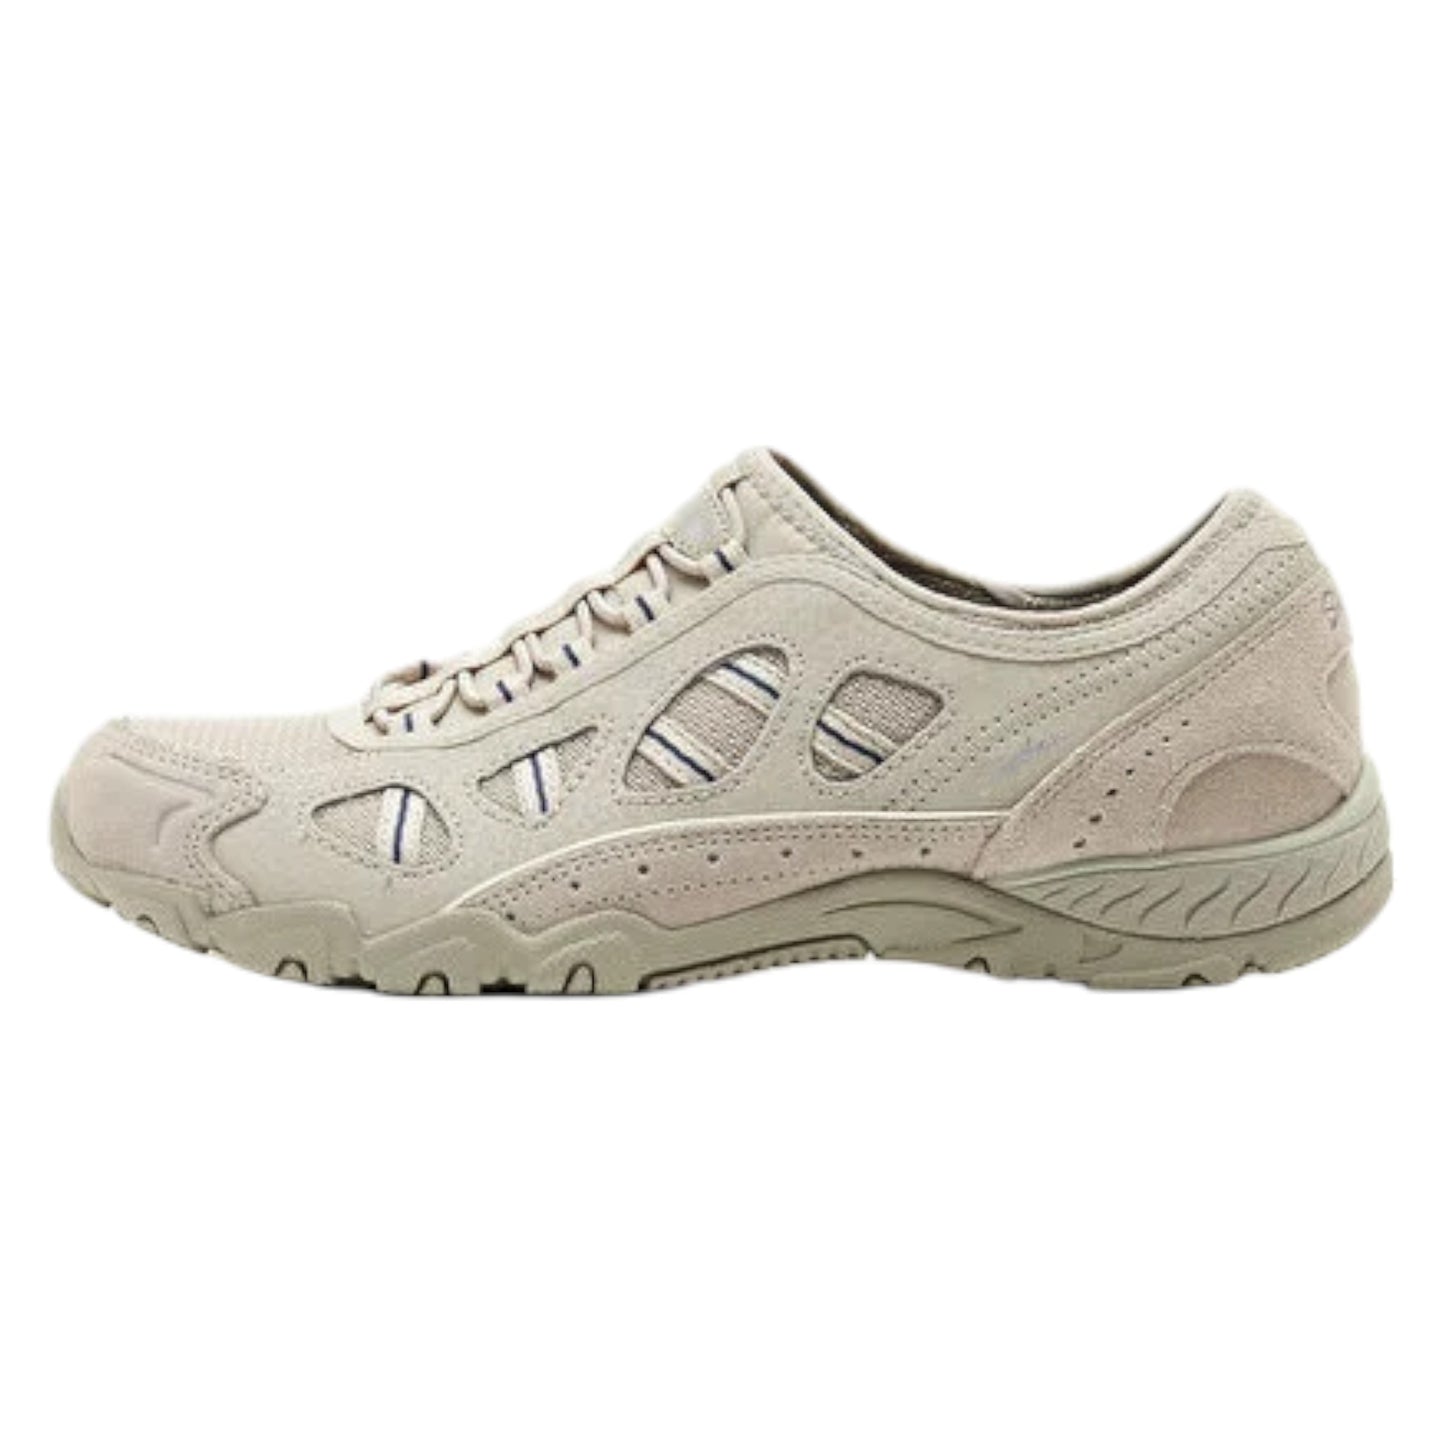 Skechers Womens Relaxed Fit: Bikers 2.0 - So Magnetic Stone/Navy - (100558.STNV) - MA - R2L16